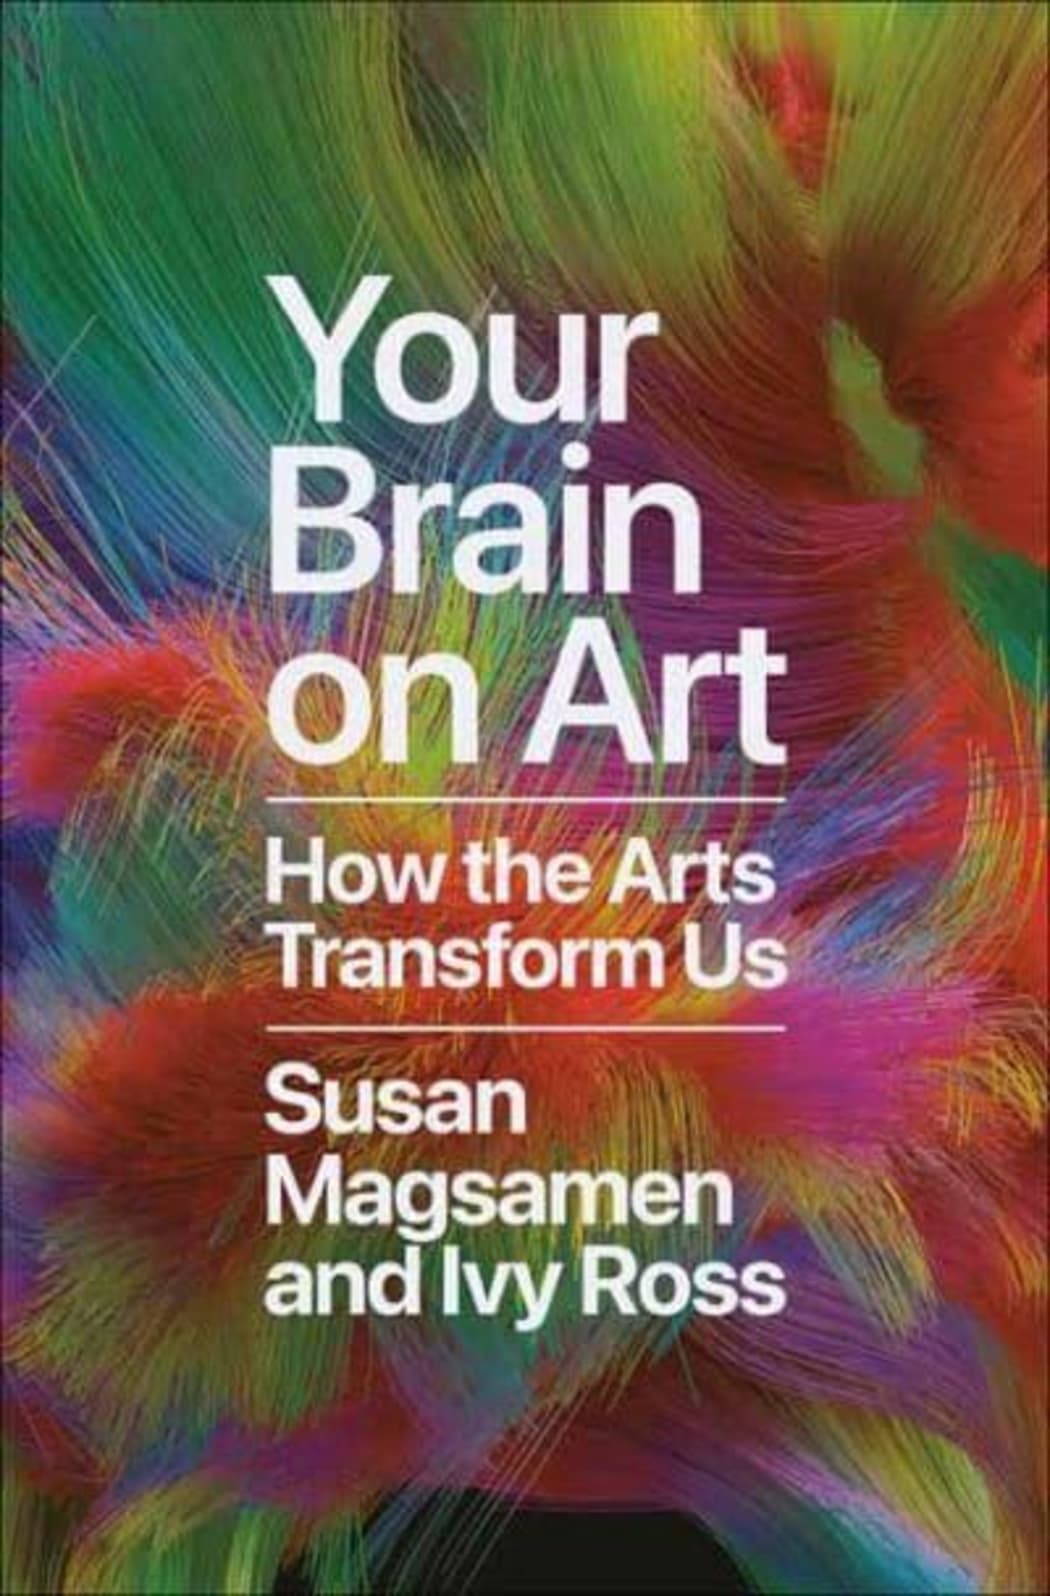 Your Brain on Art book cover